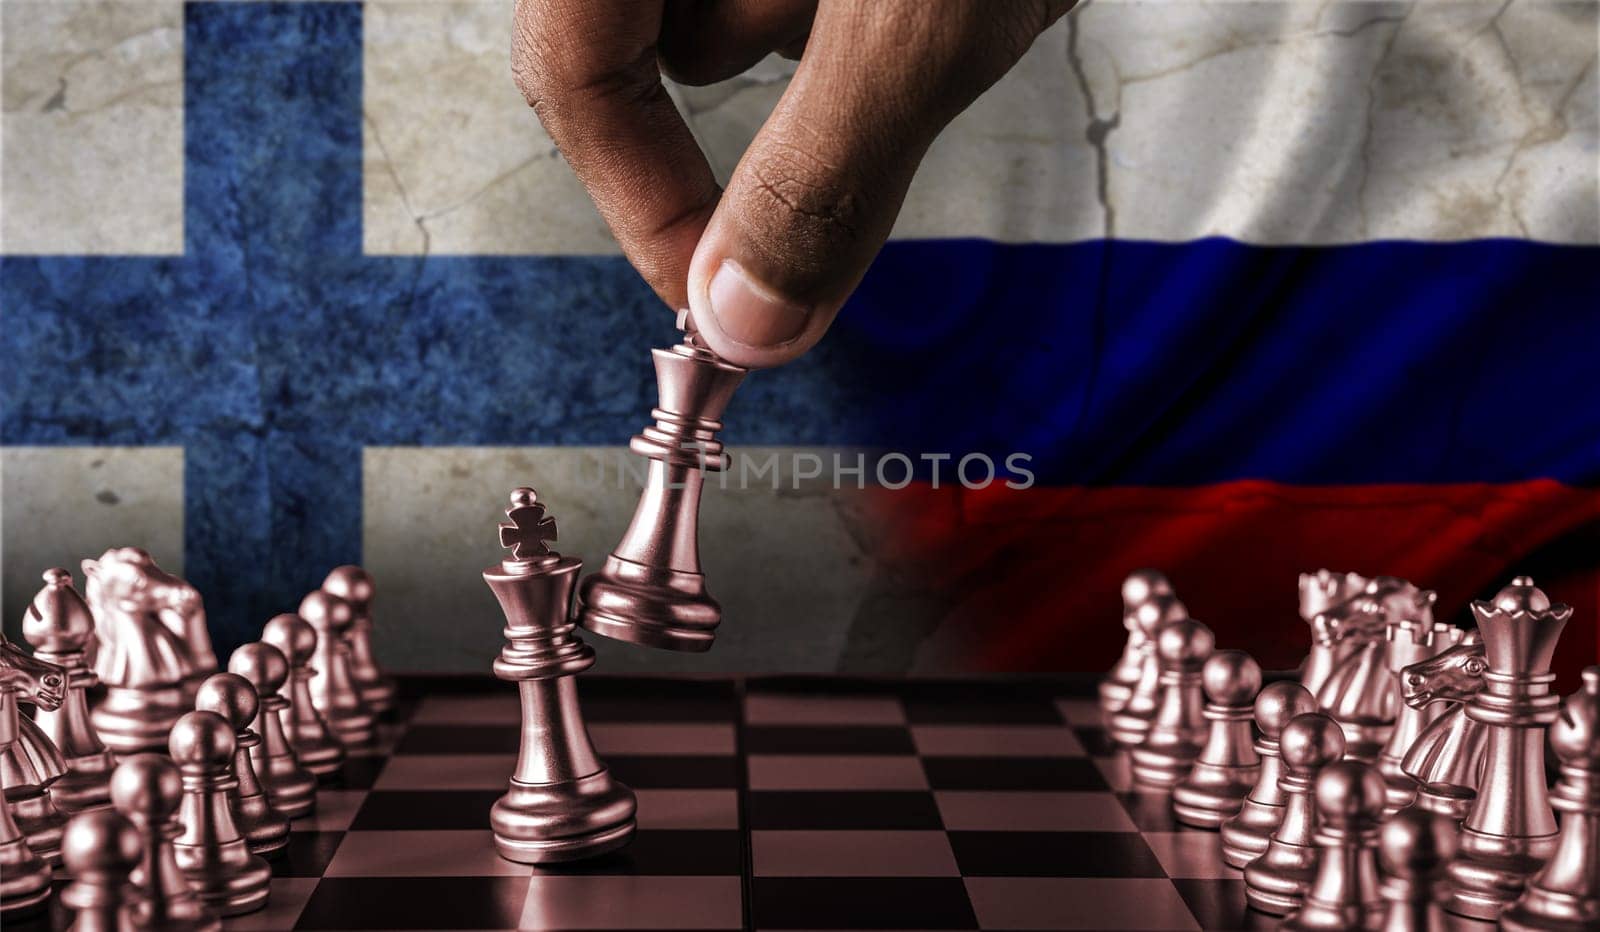 Russia vs Finland flag concept on chessboard. Political tension between Russia and Finland. Migration between Russia and Finland, Border closure